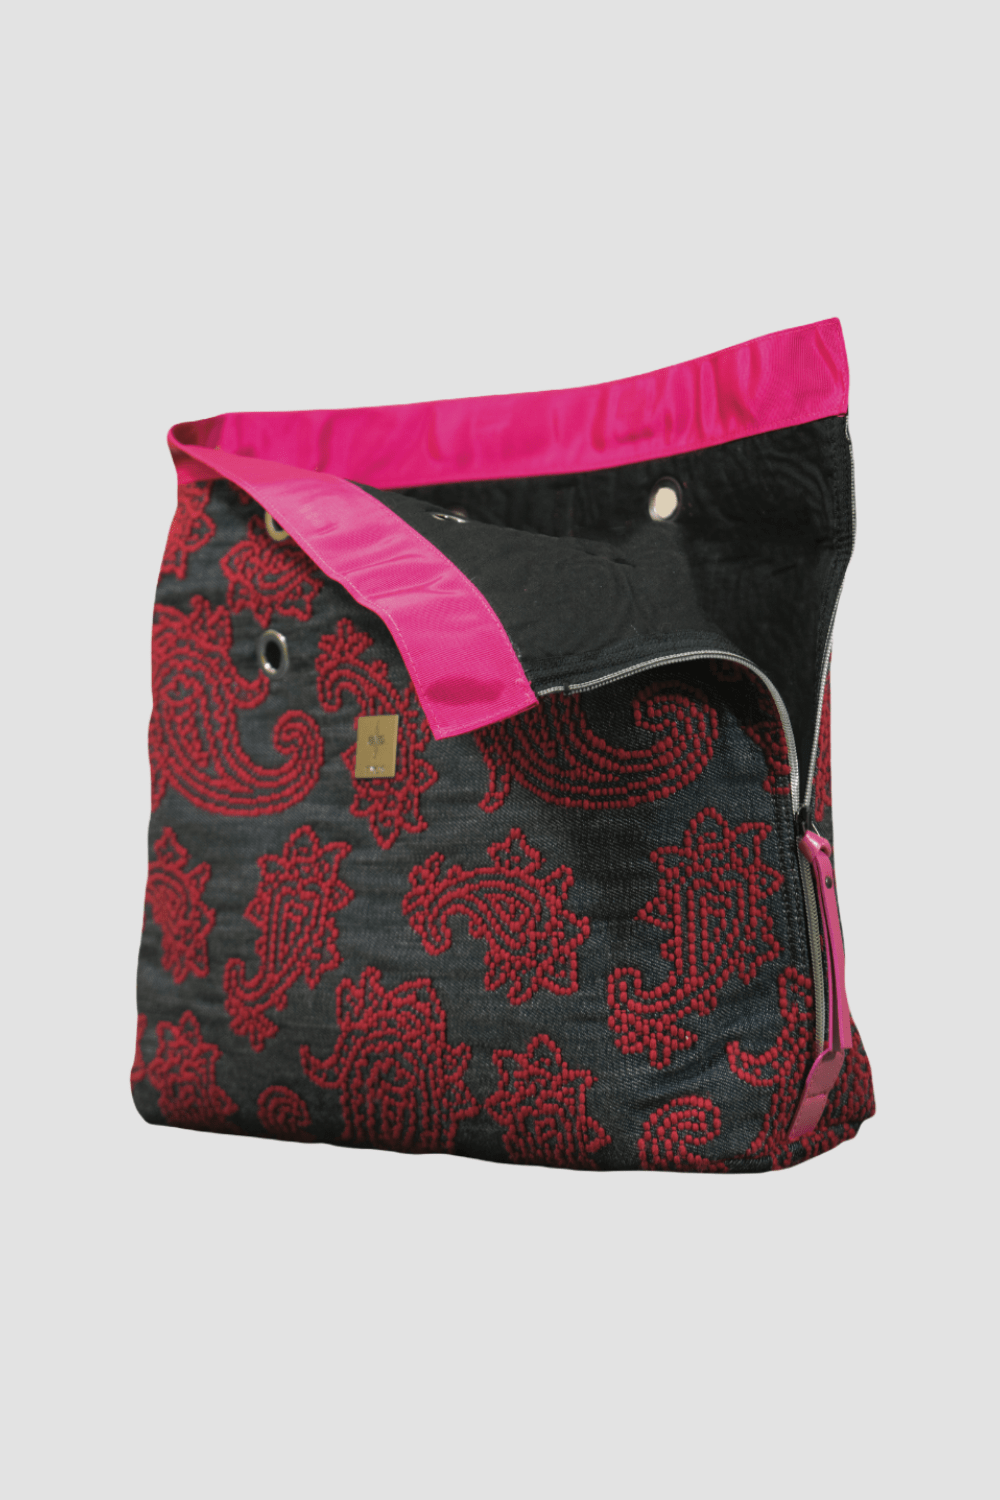 TailorYourChoiceS BAGS Red Abree Interchangeable Tote Bag Covers Dark Denim with Red Damas Embroidery Fabric